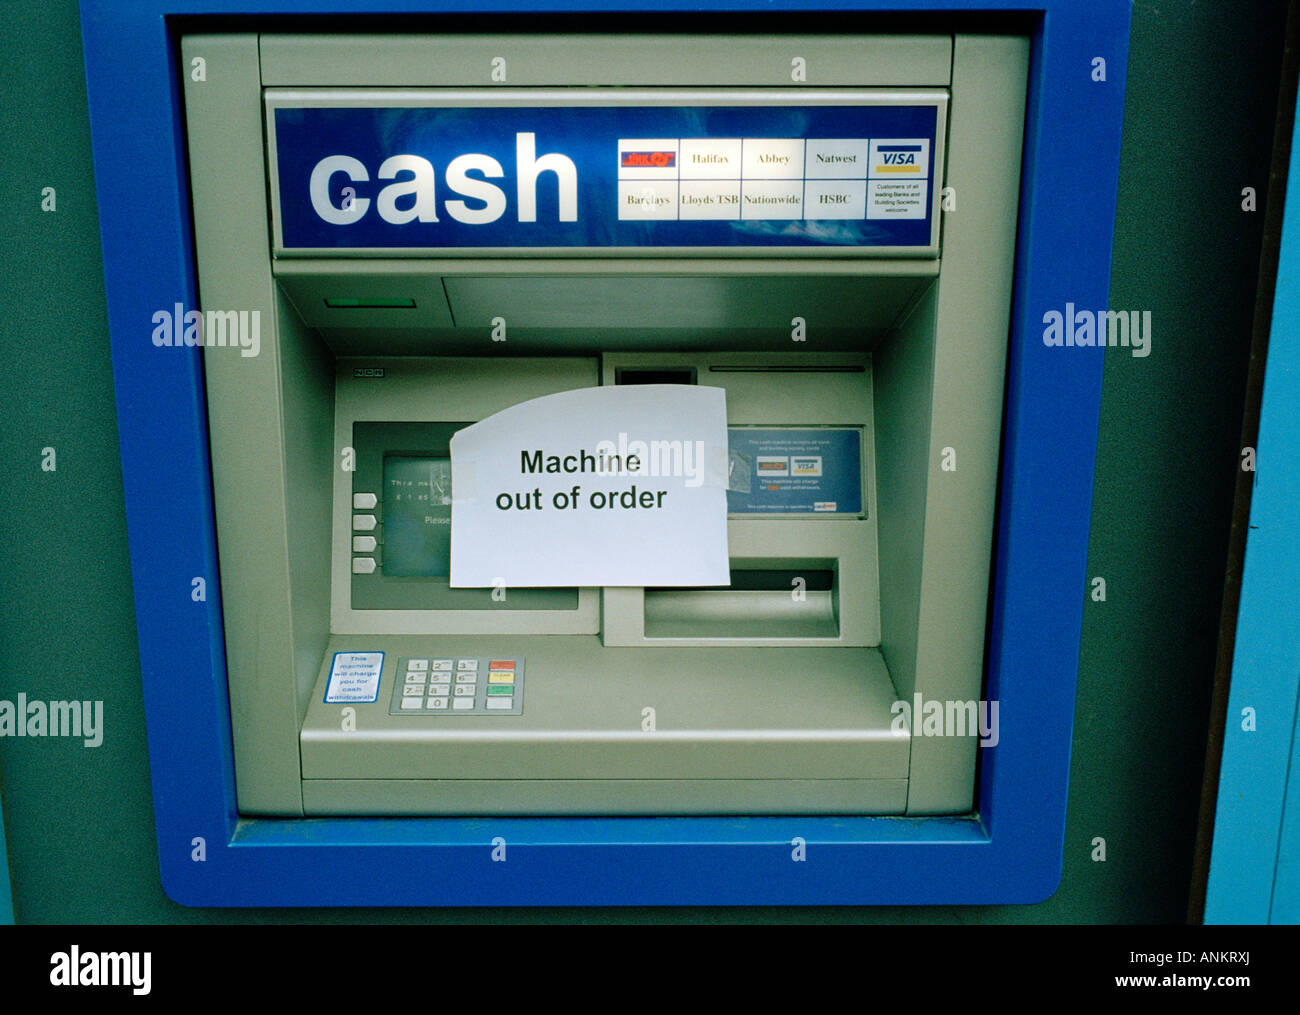 Cash money  dispensing machine with out of order sign Stock Photo